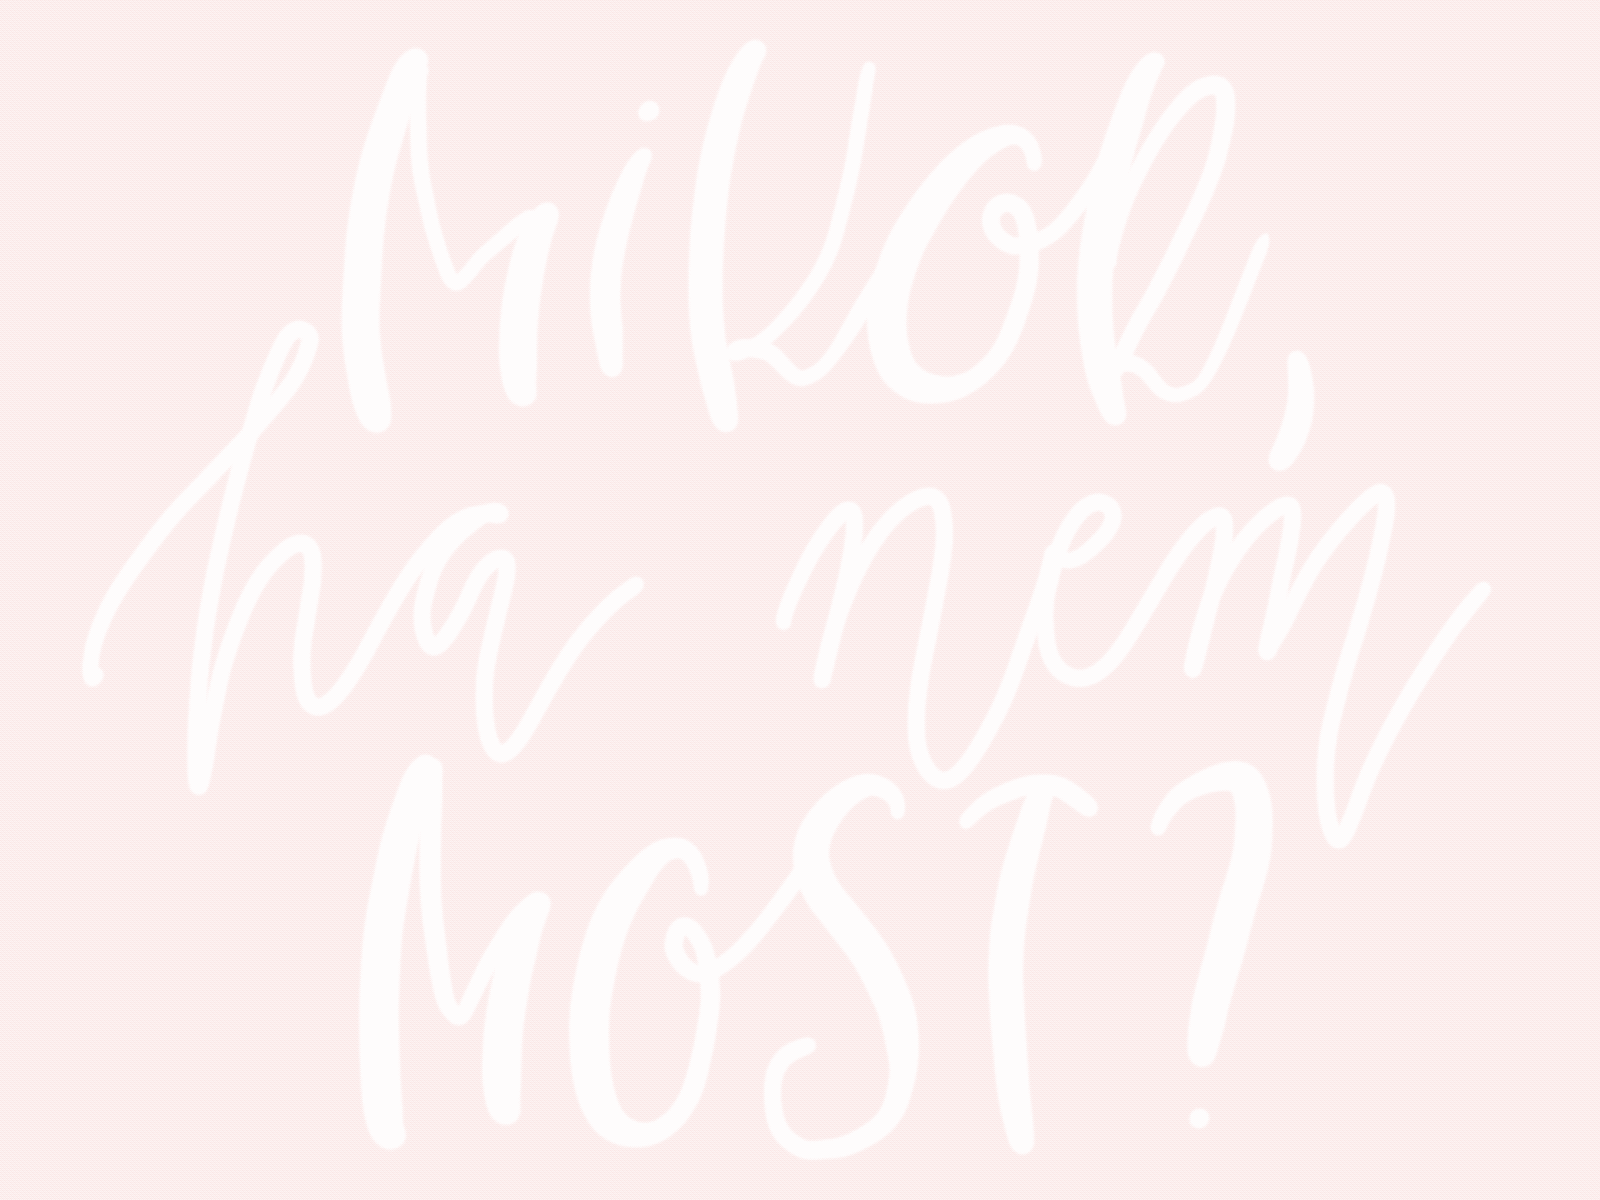 Mikor ha nem most? - When if not now? Gif animated animated gif branding design gif hungarian illustration